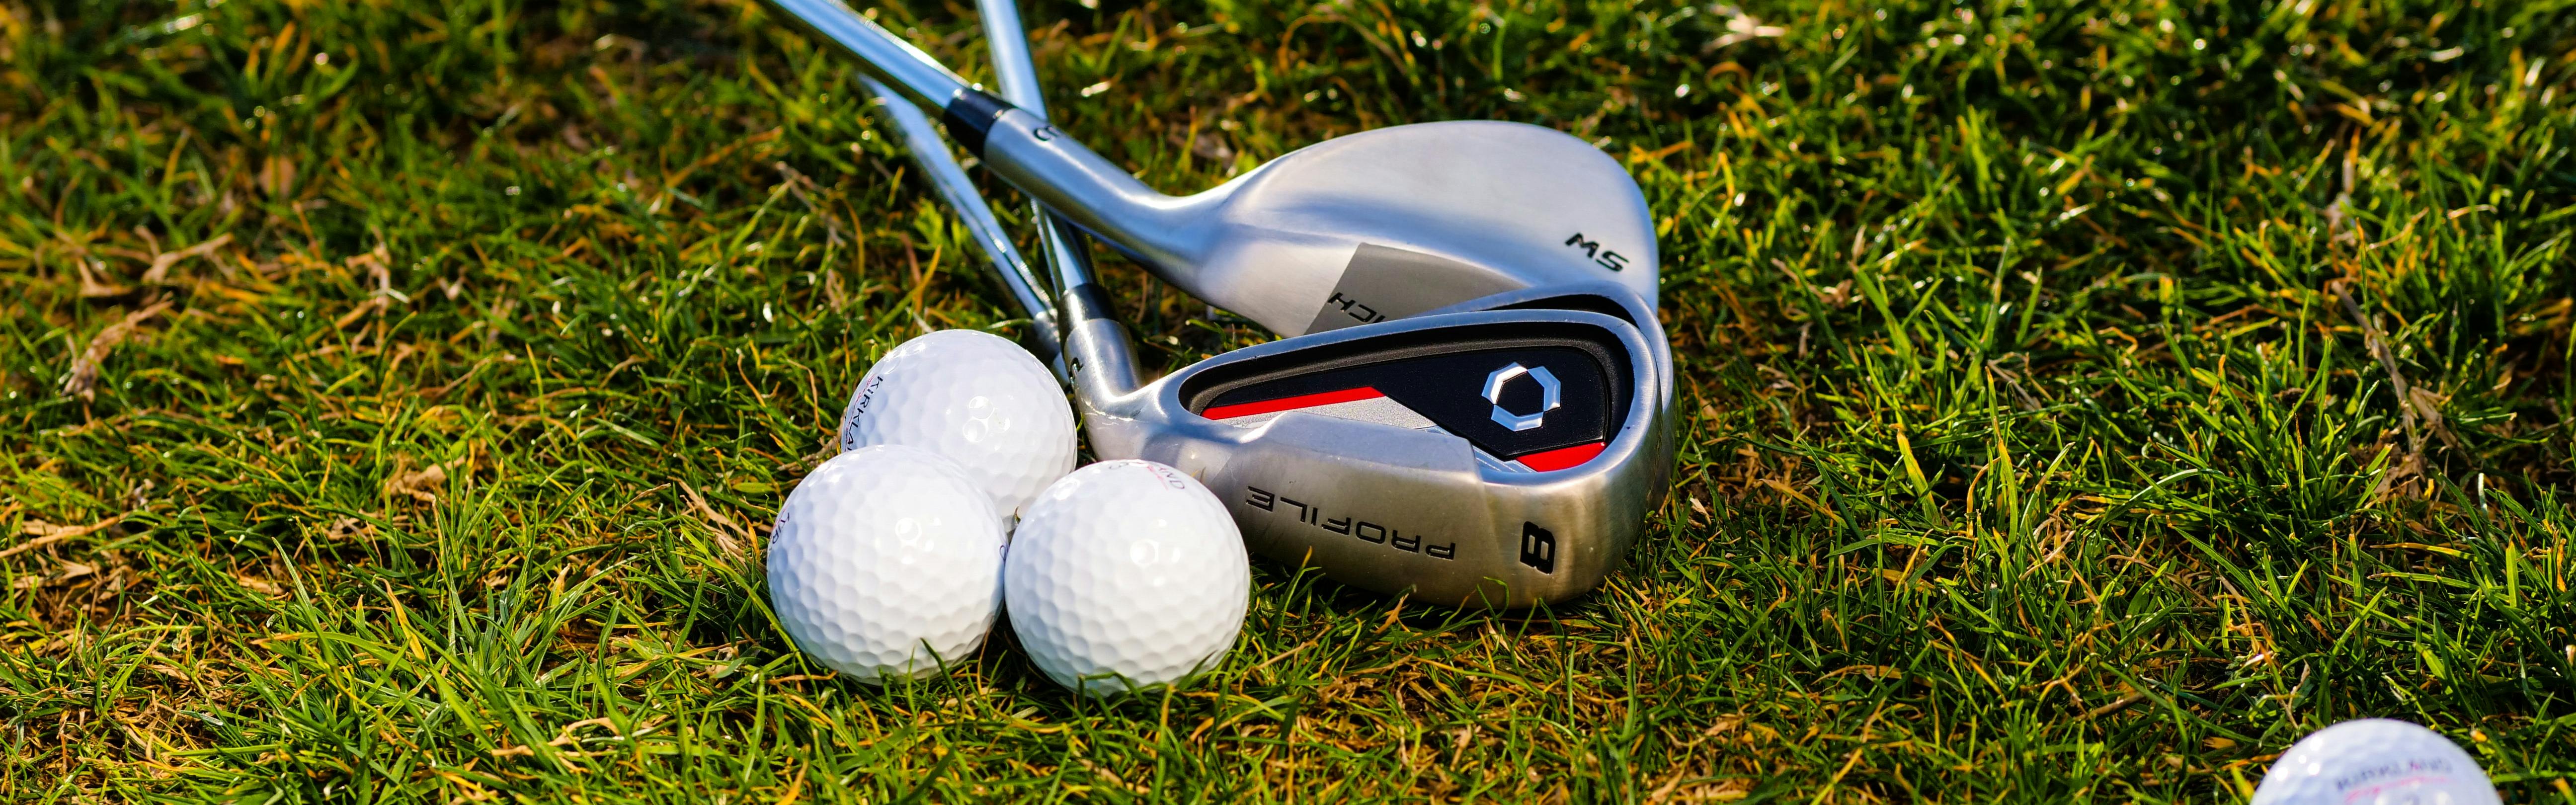 Two golf irons lying in the grass next to three golf balls. 